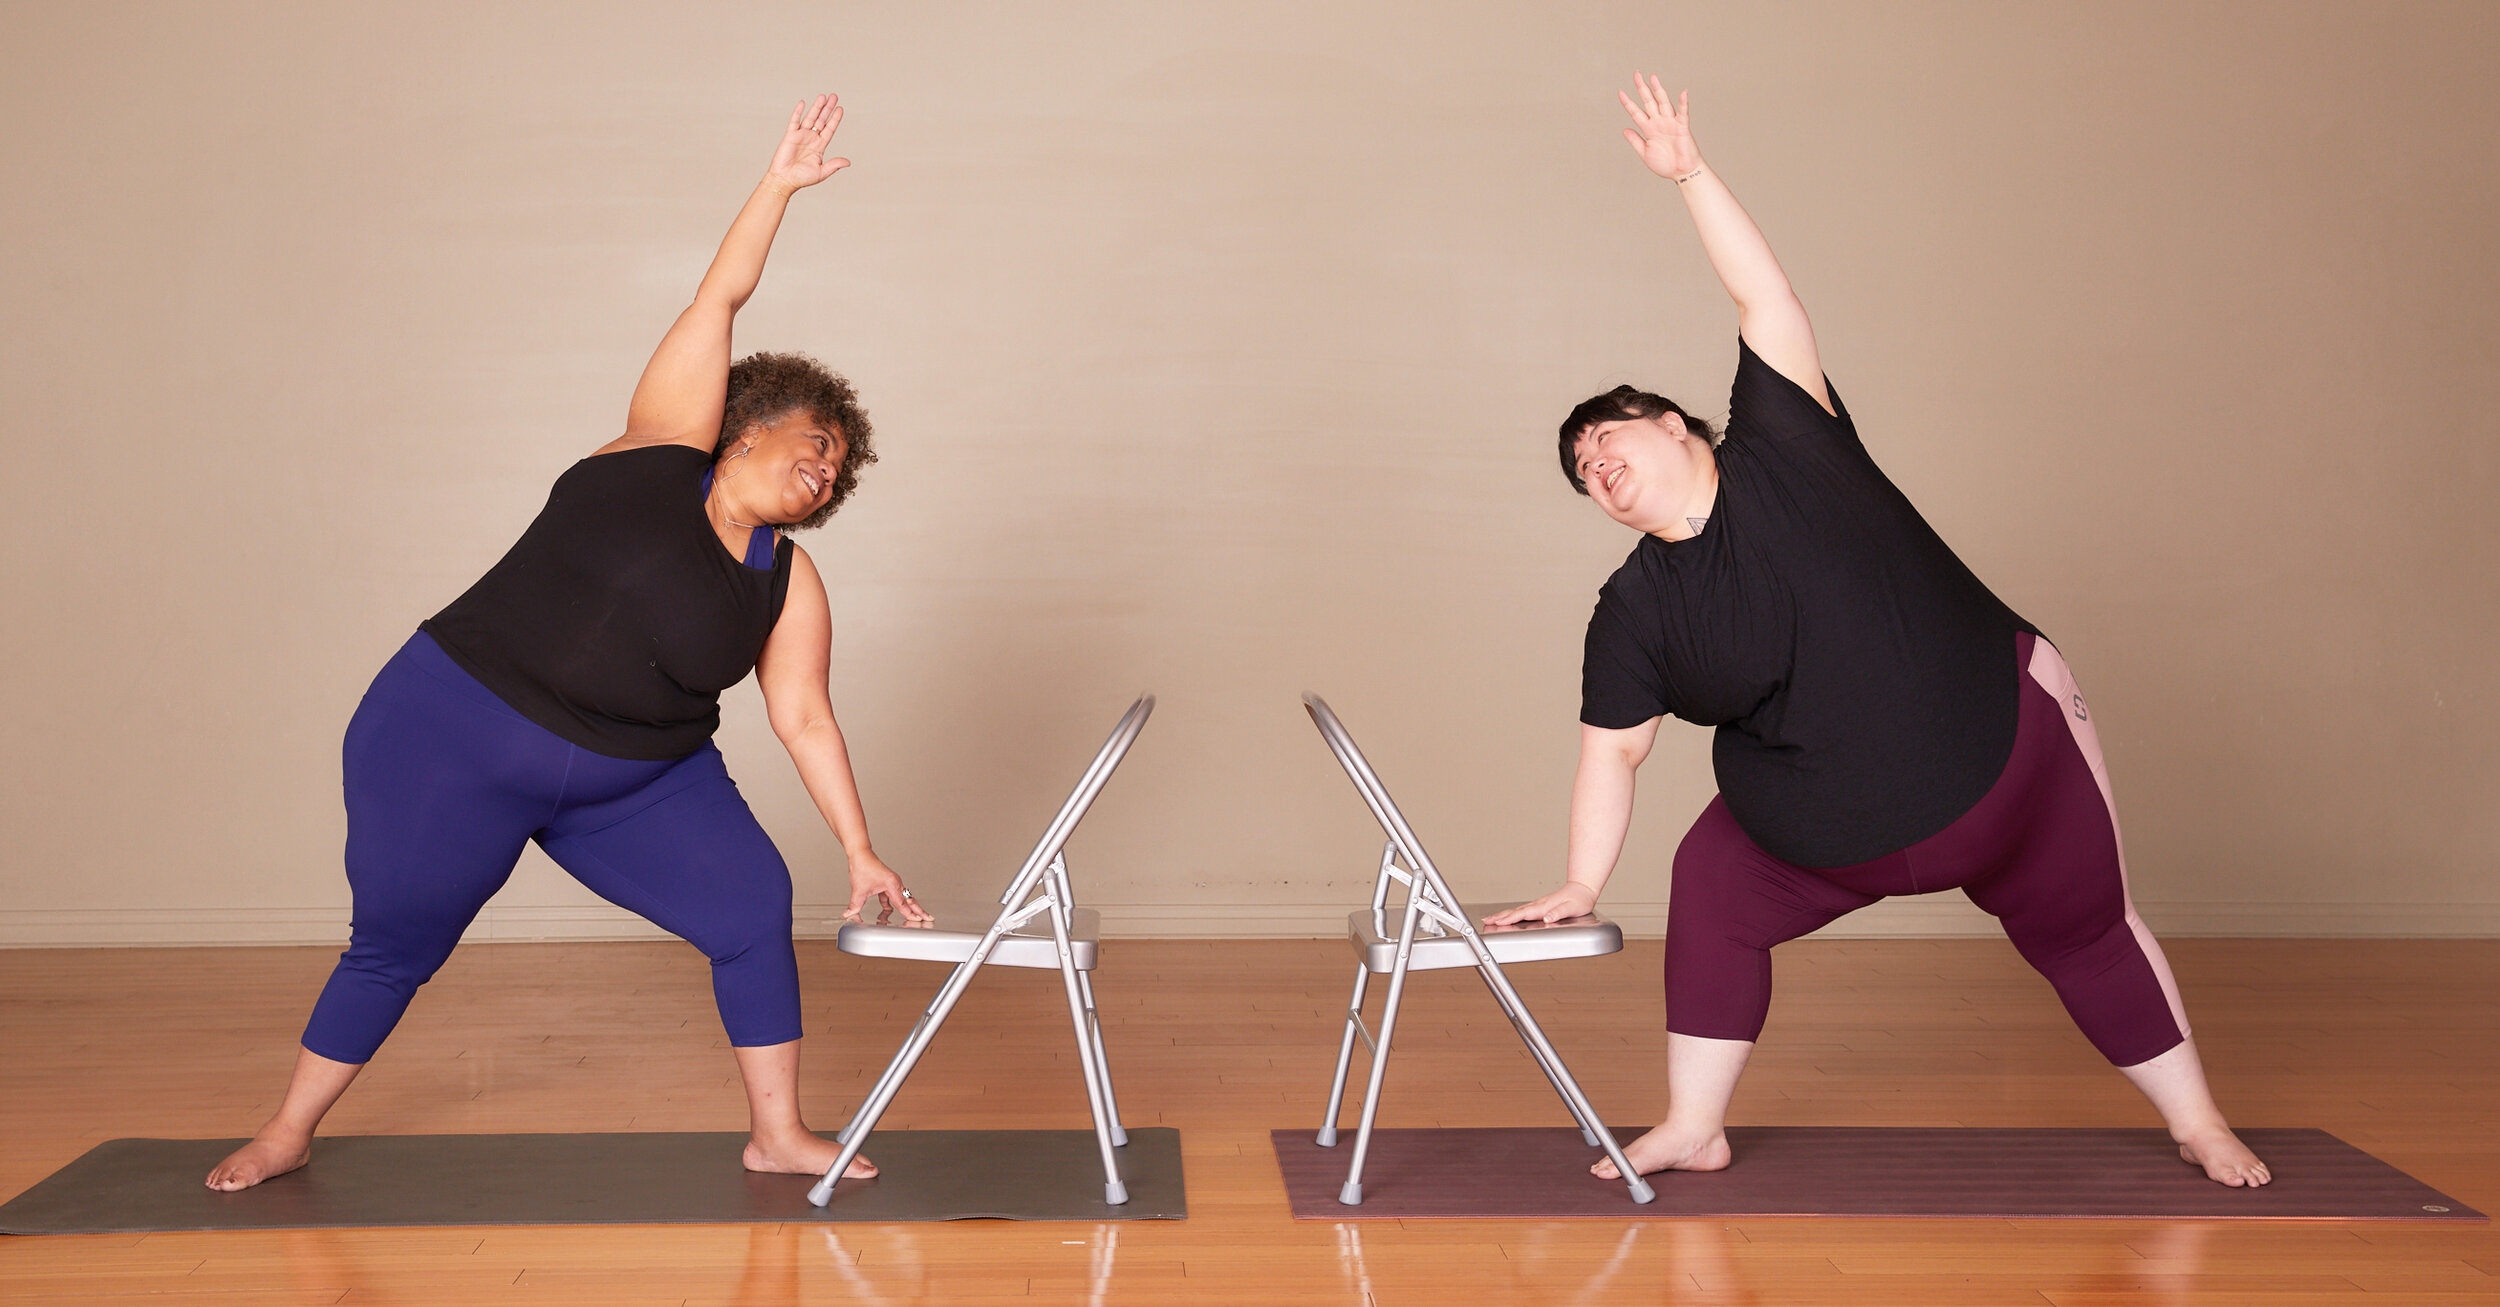 New Book by Human Kinetics: Big & Bold: Yoga for the Plus-Size